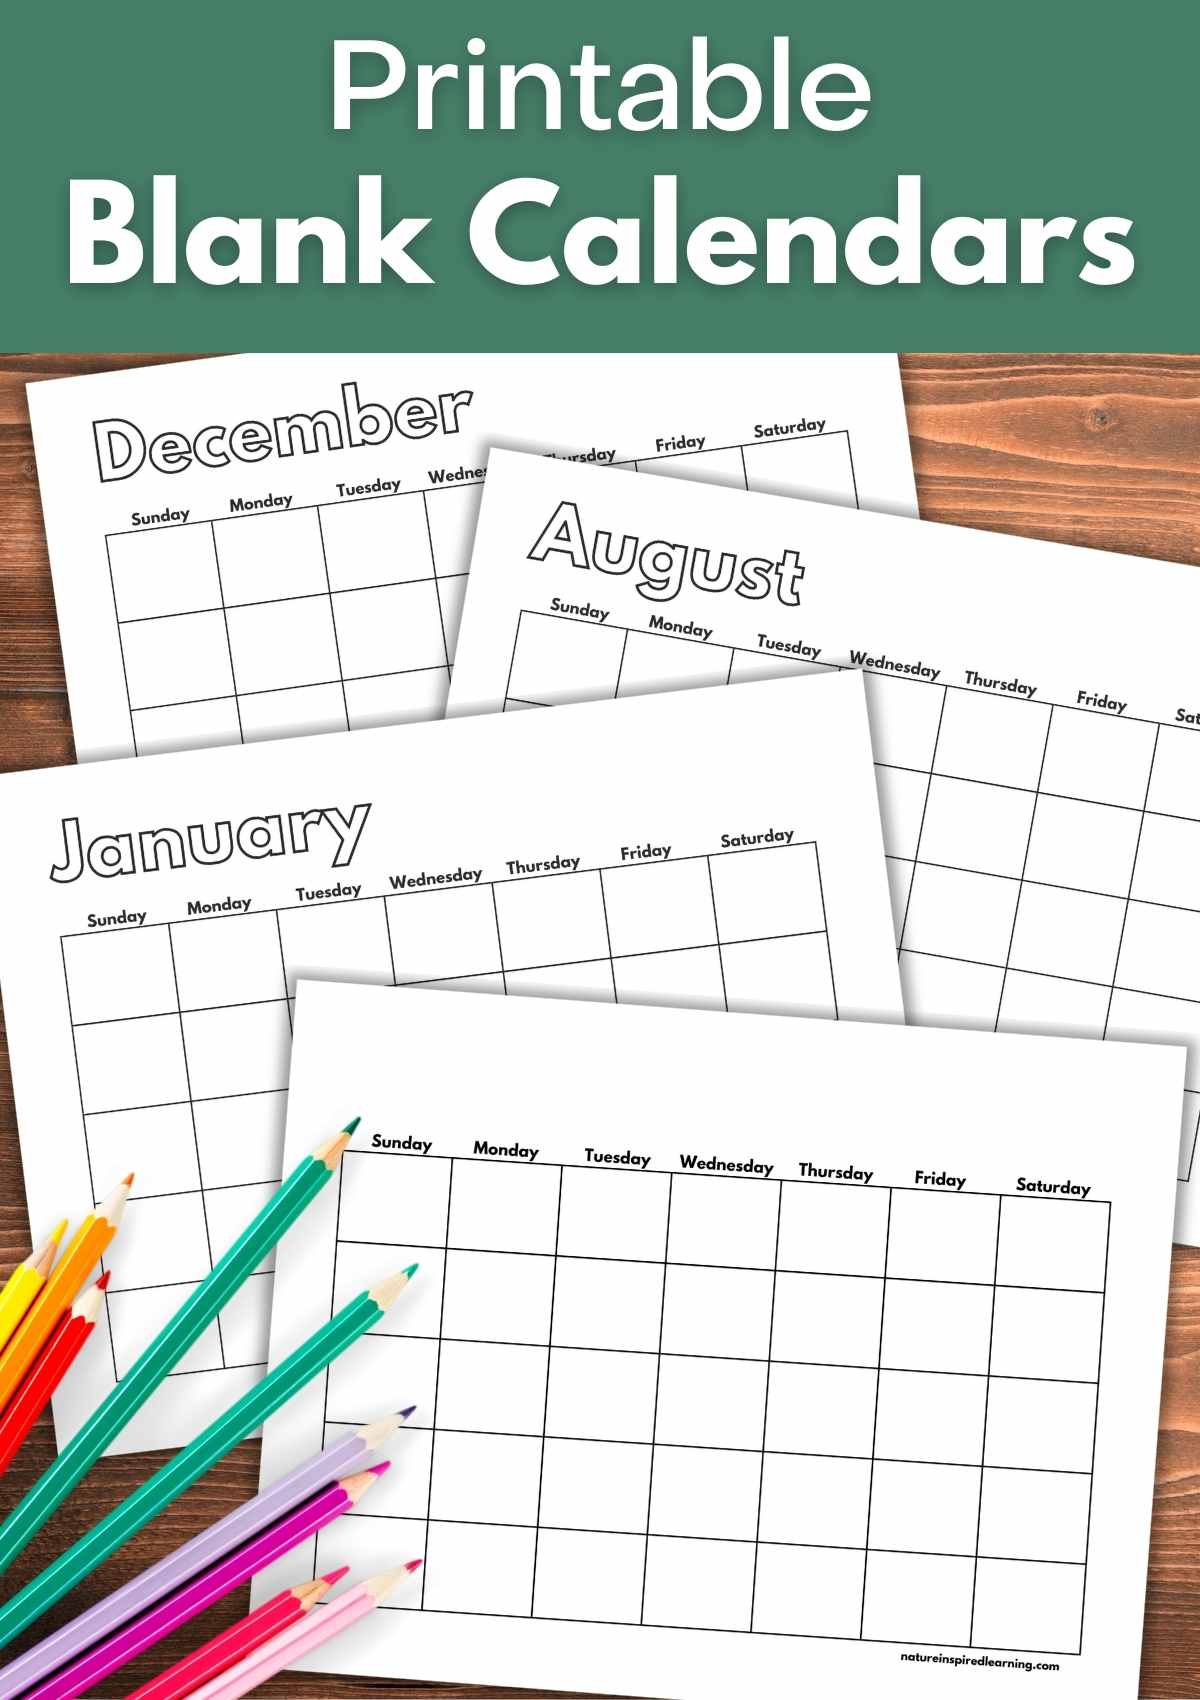 four blank calendar templates overlapping on a wooden background with different colored pencils bottom left and text overlay across the top over green background